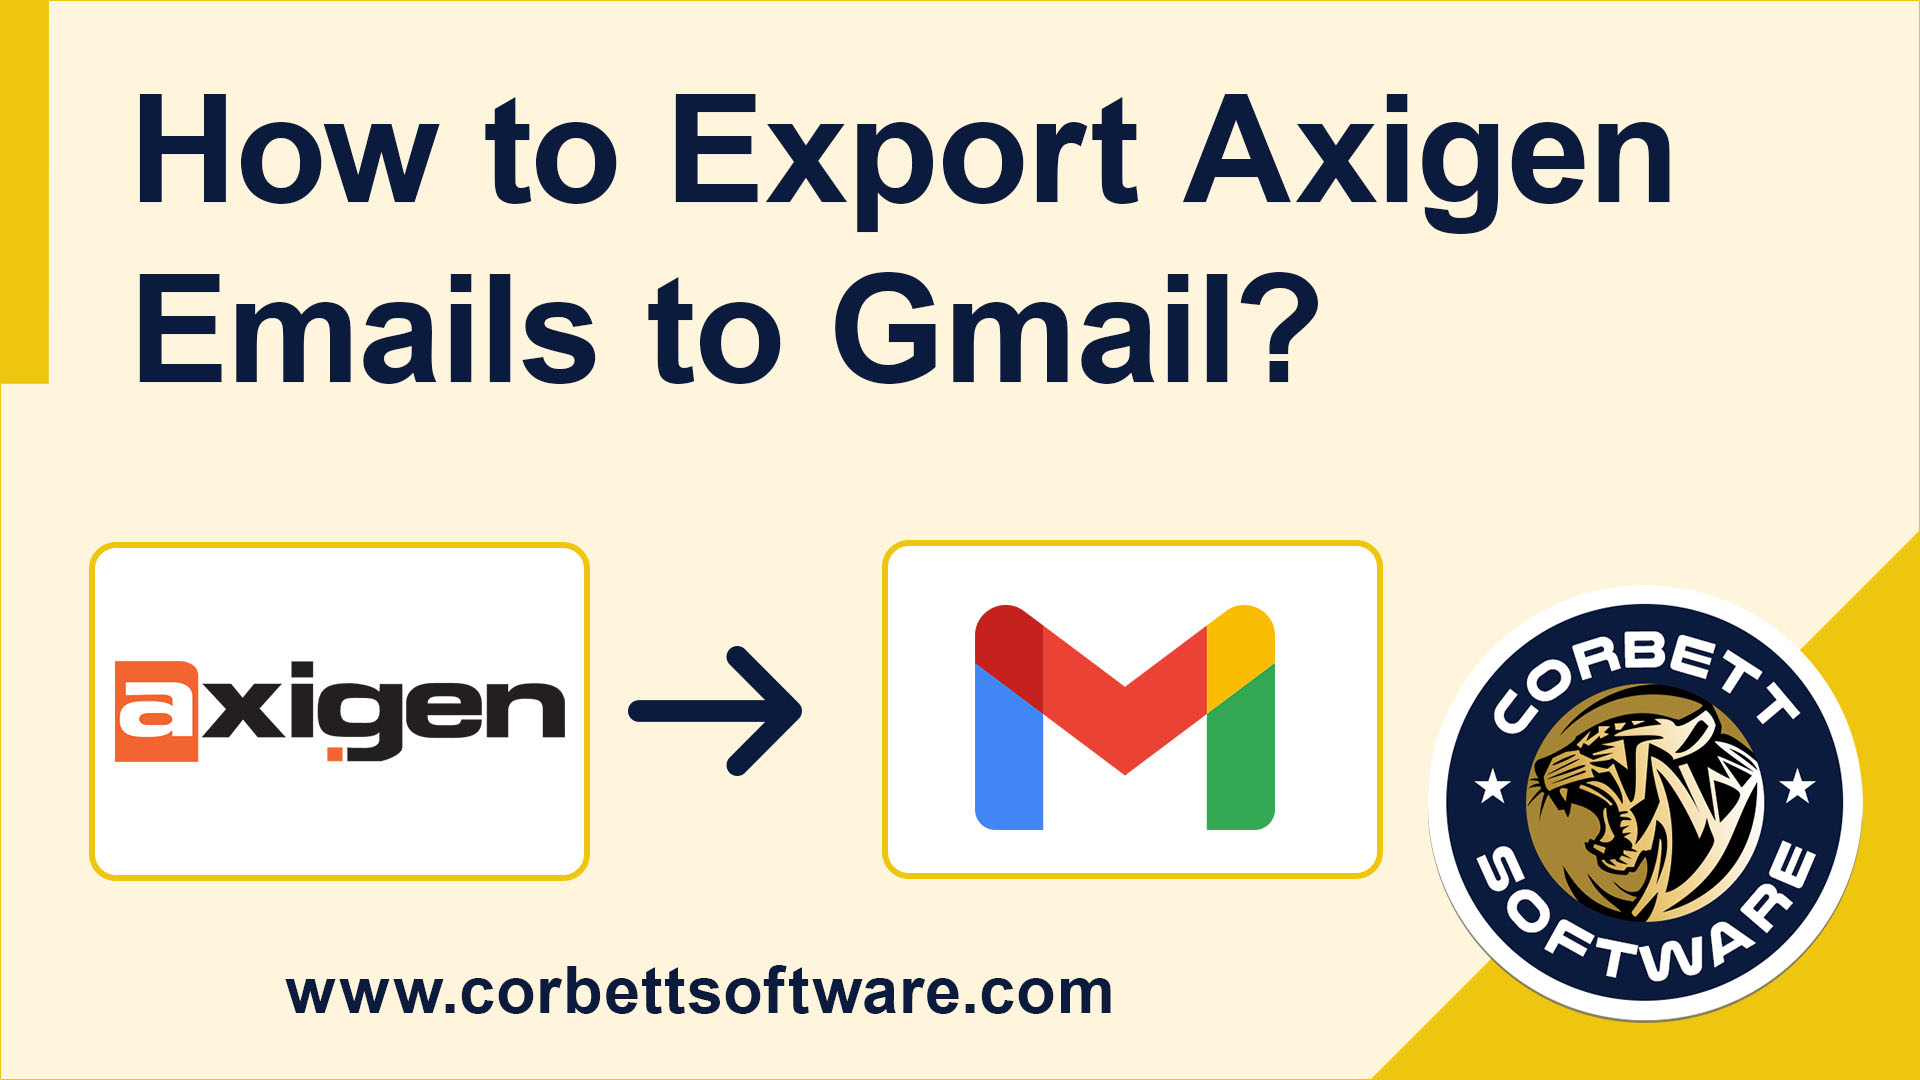 How to Export Axigen Emails to Gmail